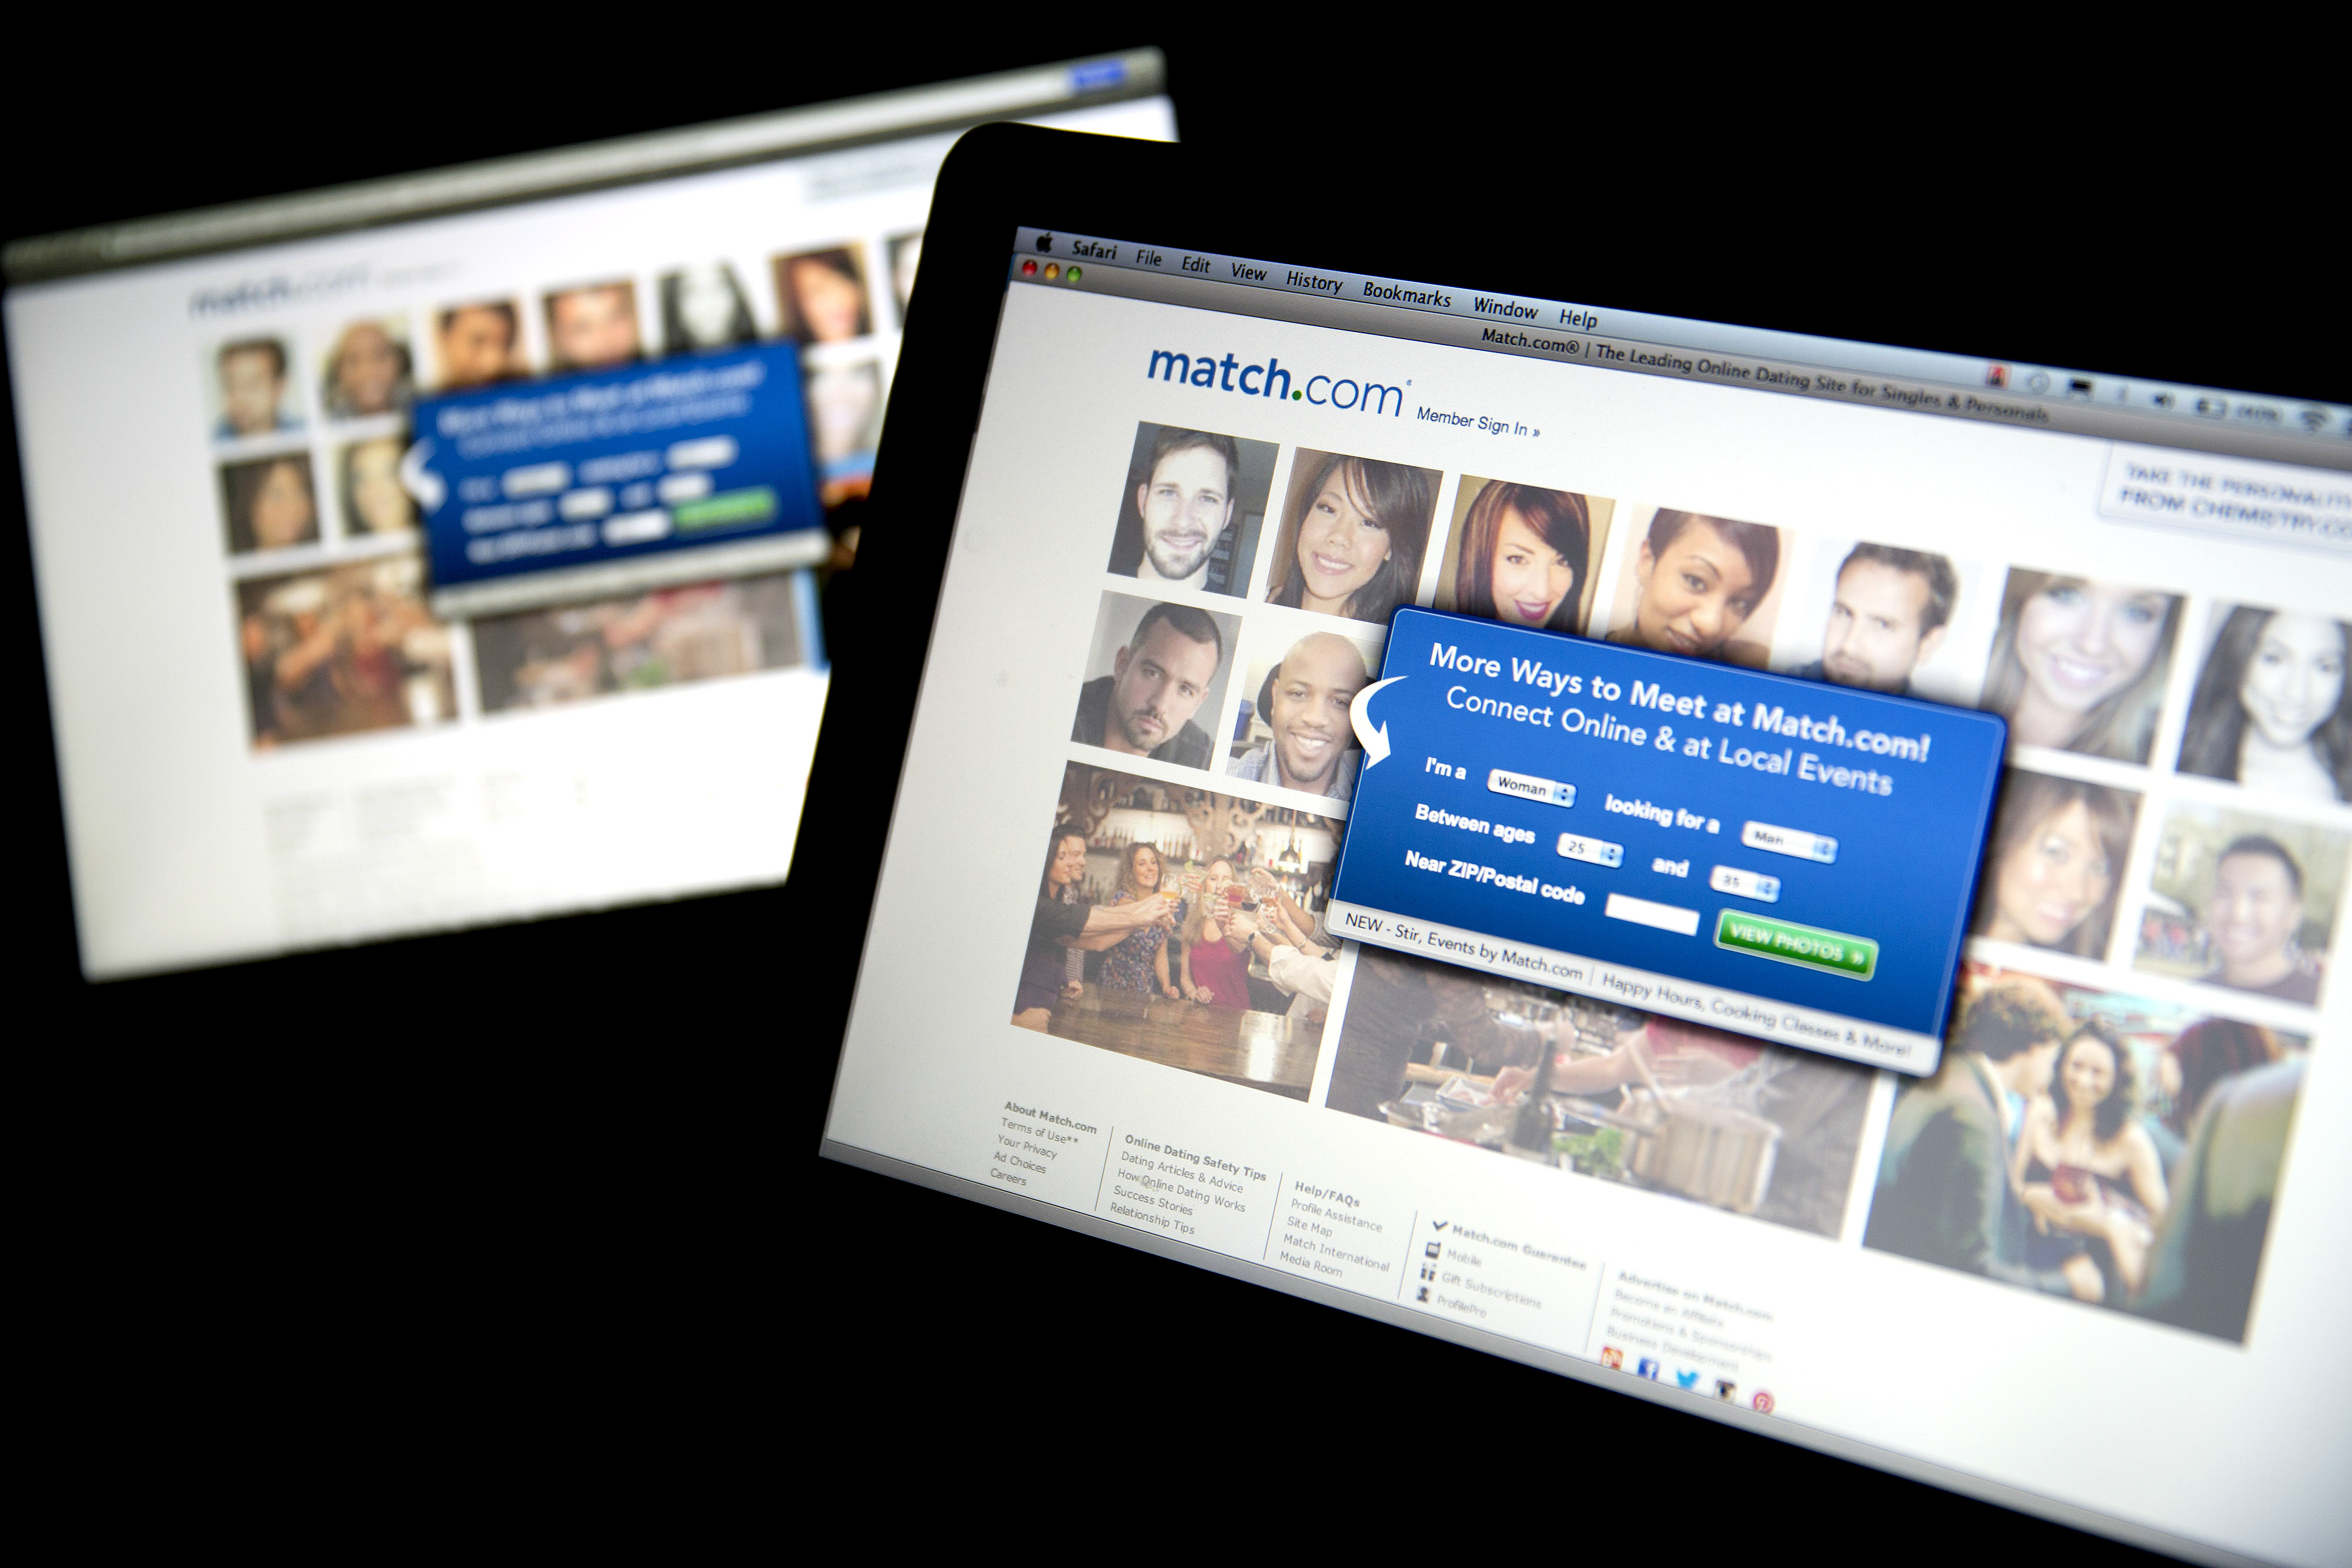 The Match.com website is displayed on laptop computers arranged for a photograph in Washington, D.C., U.S., on Thursday, Dec. 19, 2013. (Andrew Harrer—Bloomberg/Getty Images)